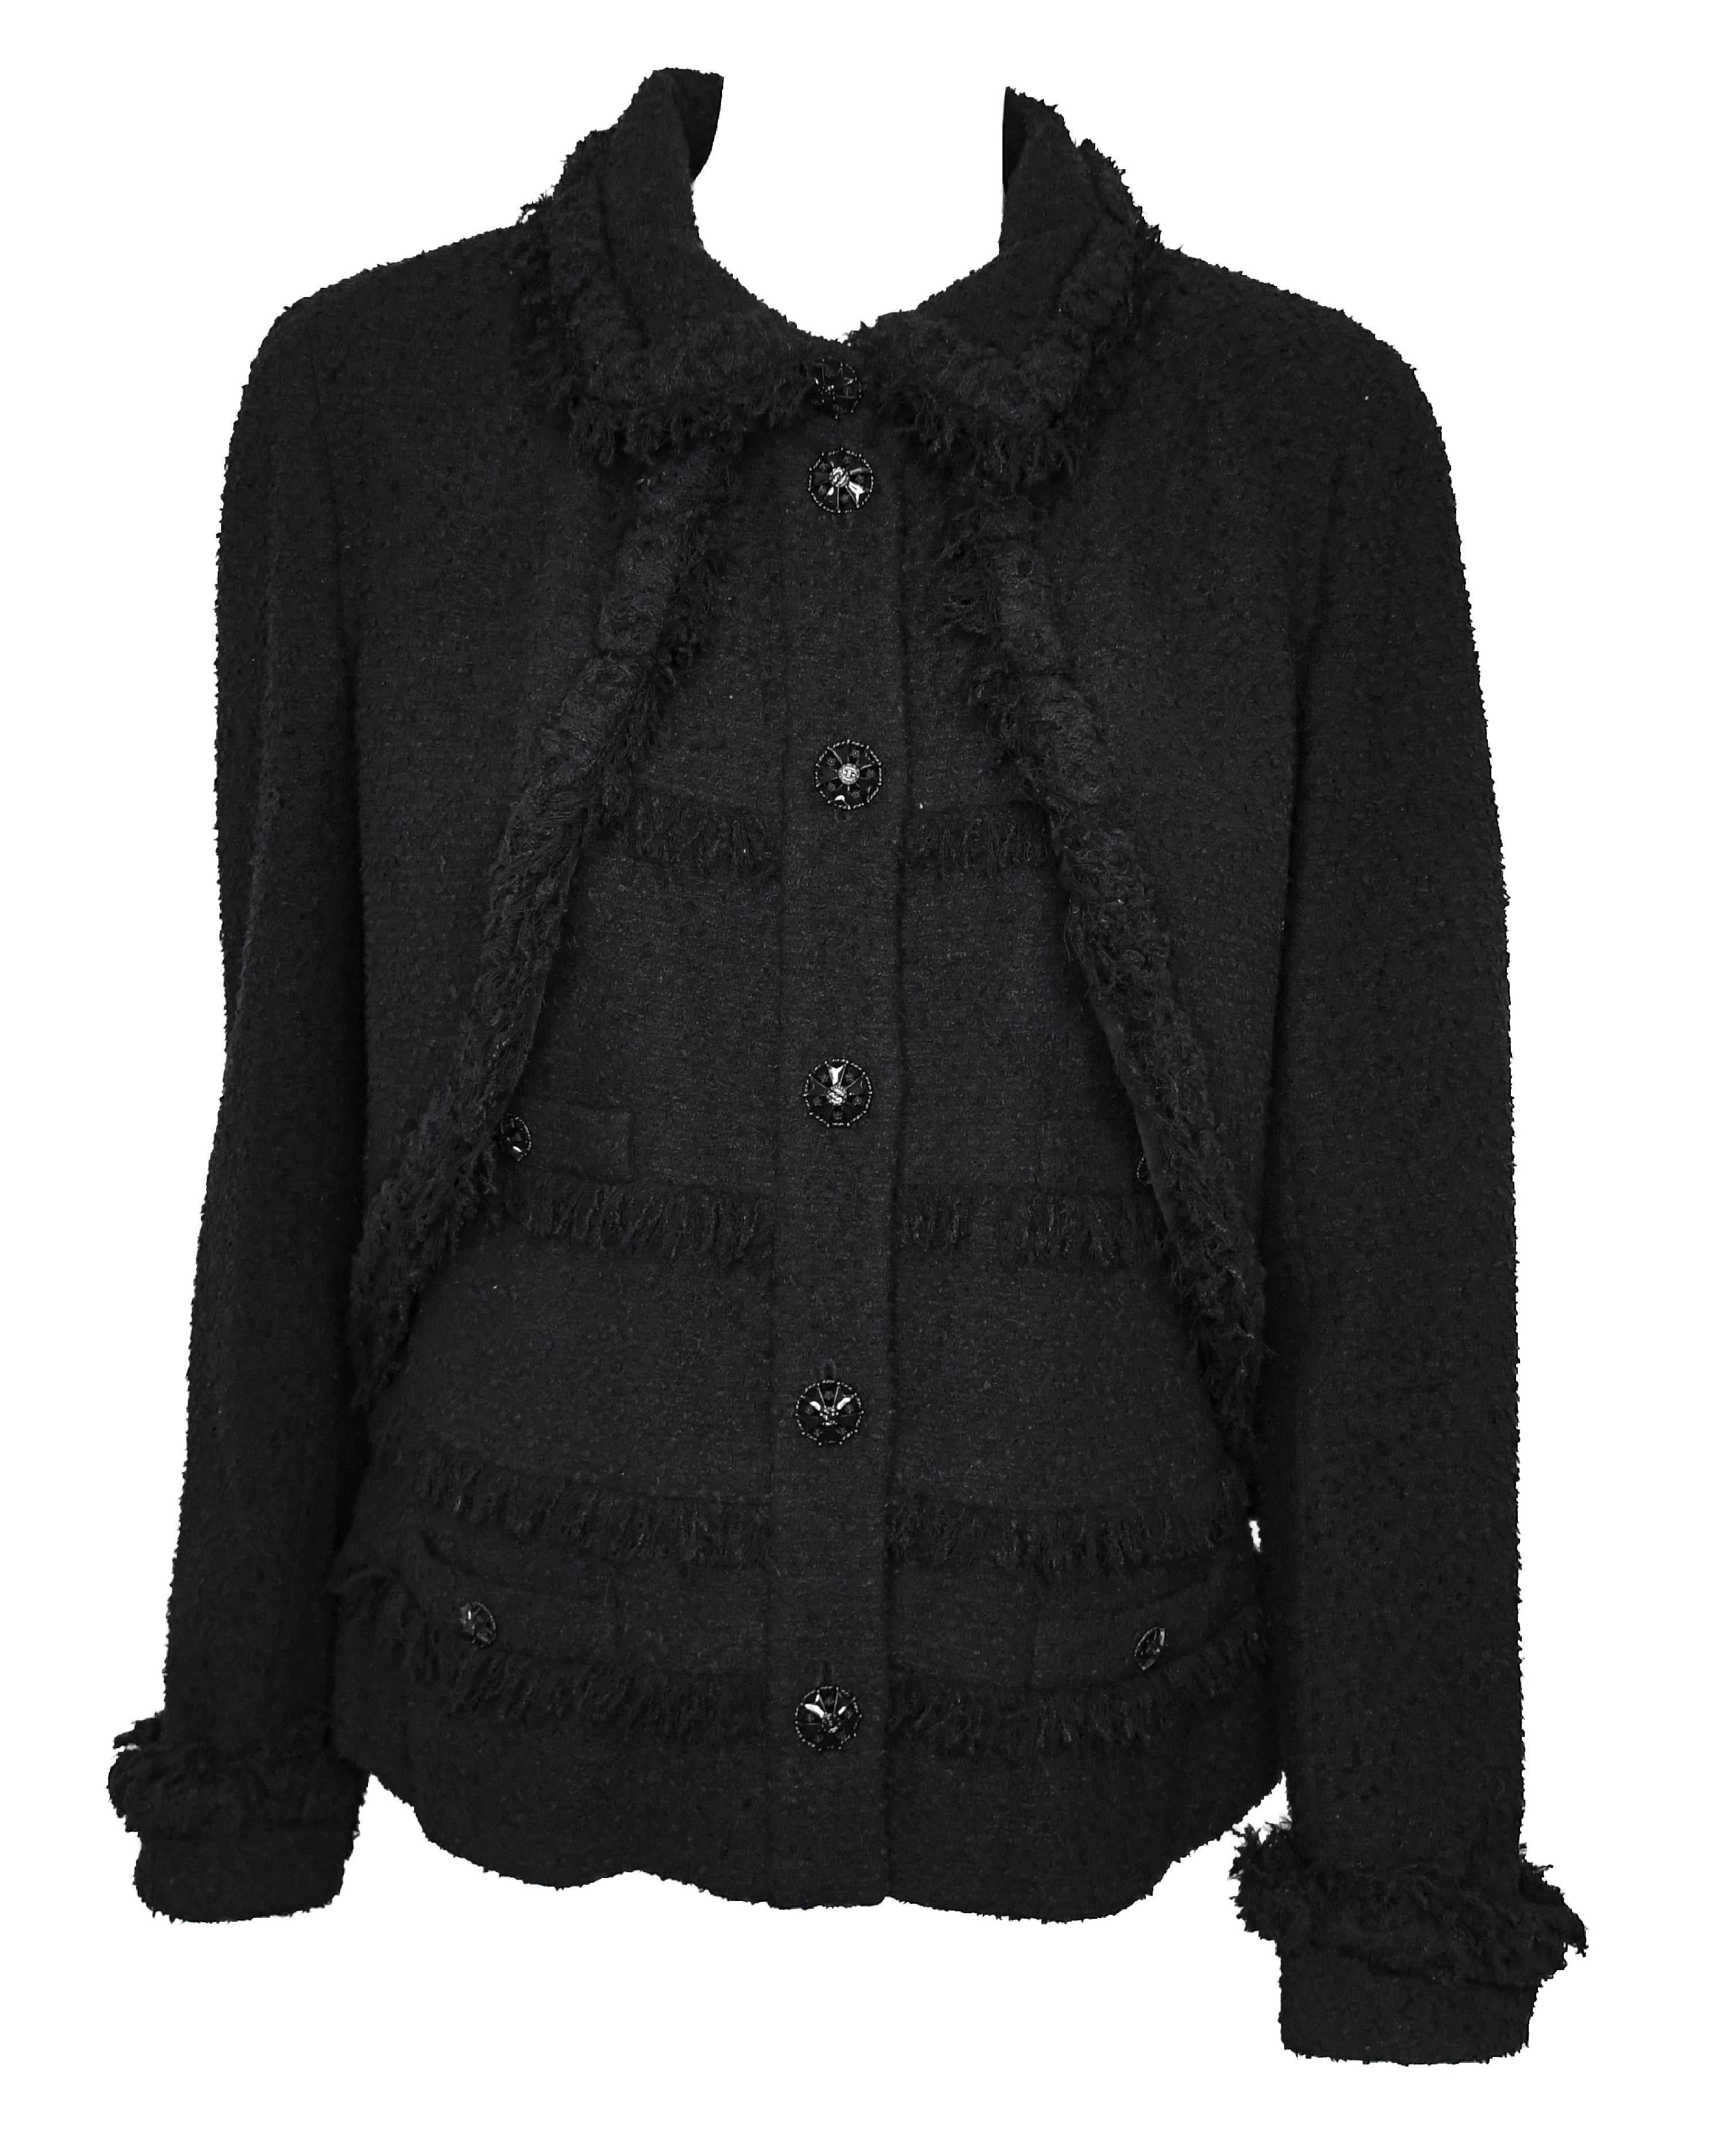 Chanel black tweed sleeveless top with attached bolero jacket overlay was in the 2008 runway collection.  This unusual jacket is a vest style top with a bolero jacket overlay.  This long sleeve jacket has up turn cuffs and 4 faux pockets with Chanel